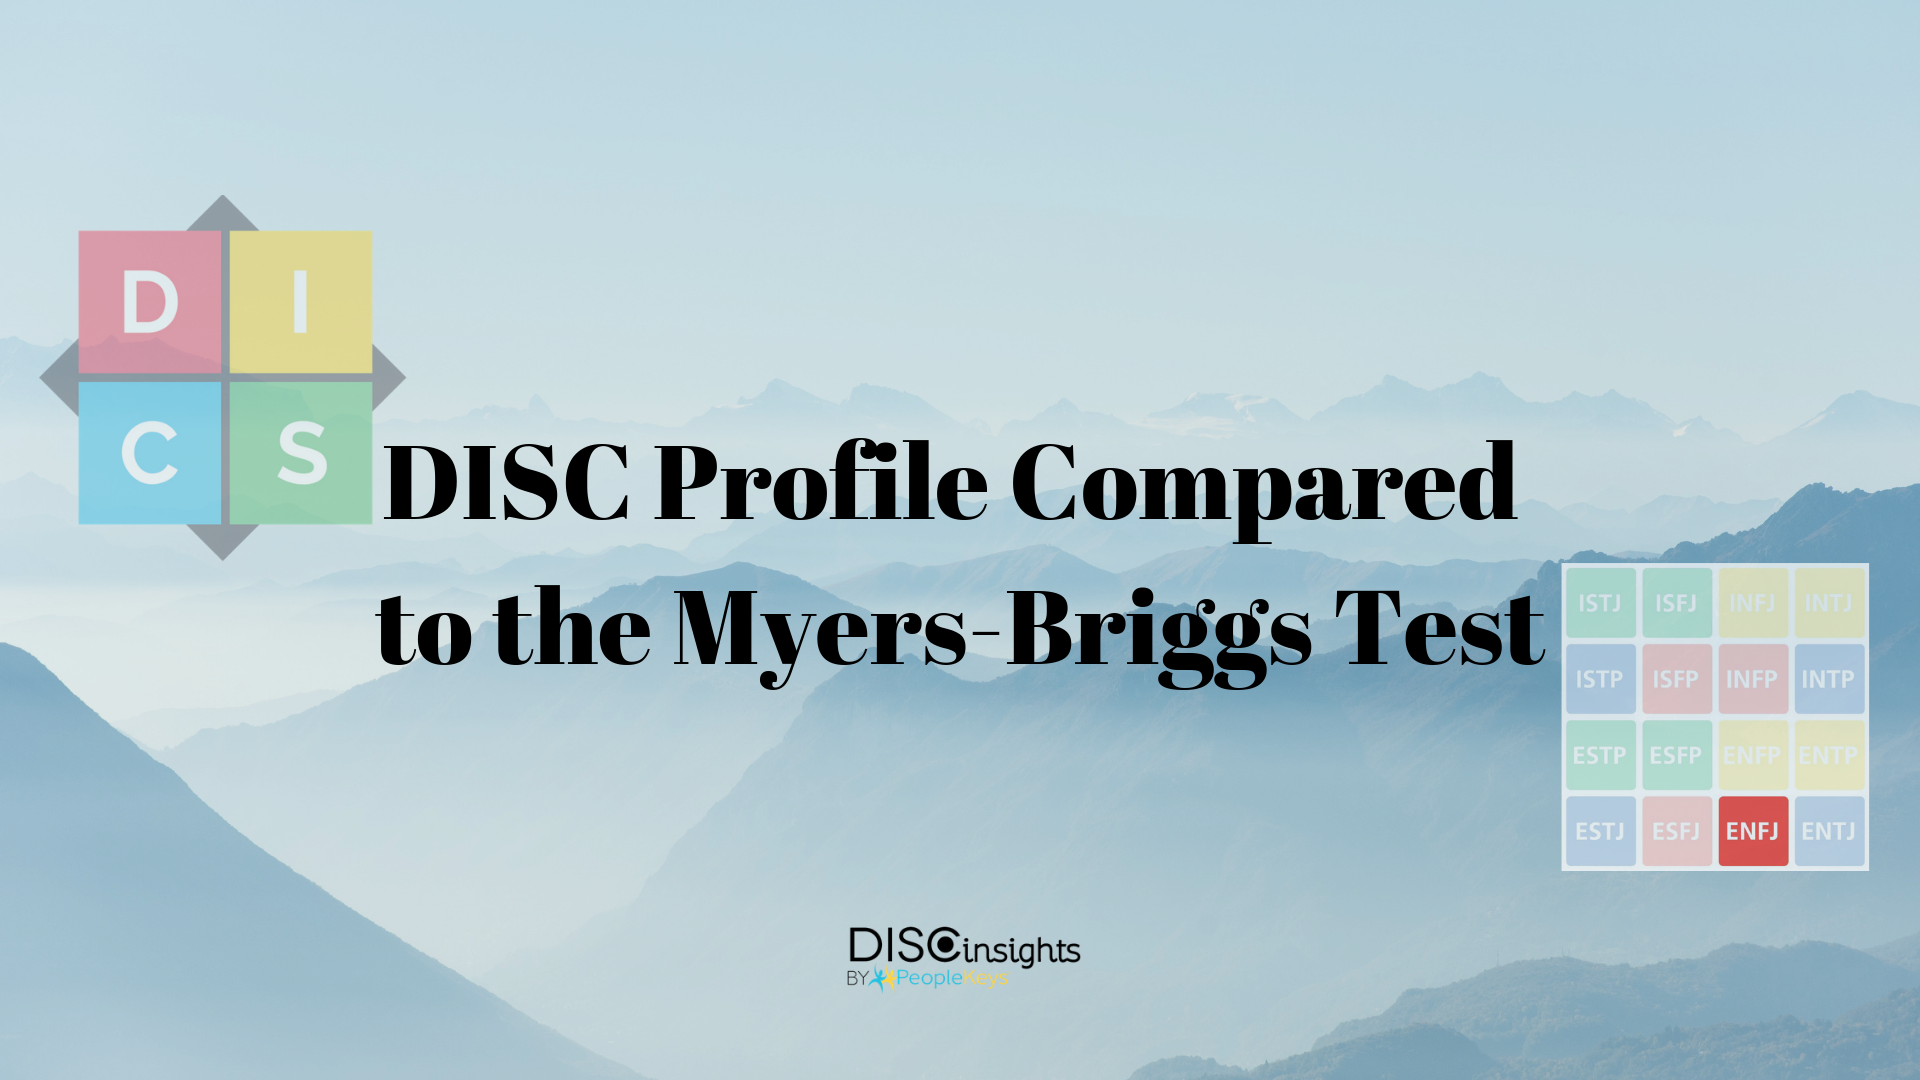 DISC Profile Compared to the Myers-Briggs Test